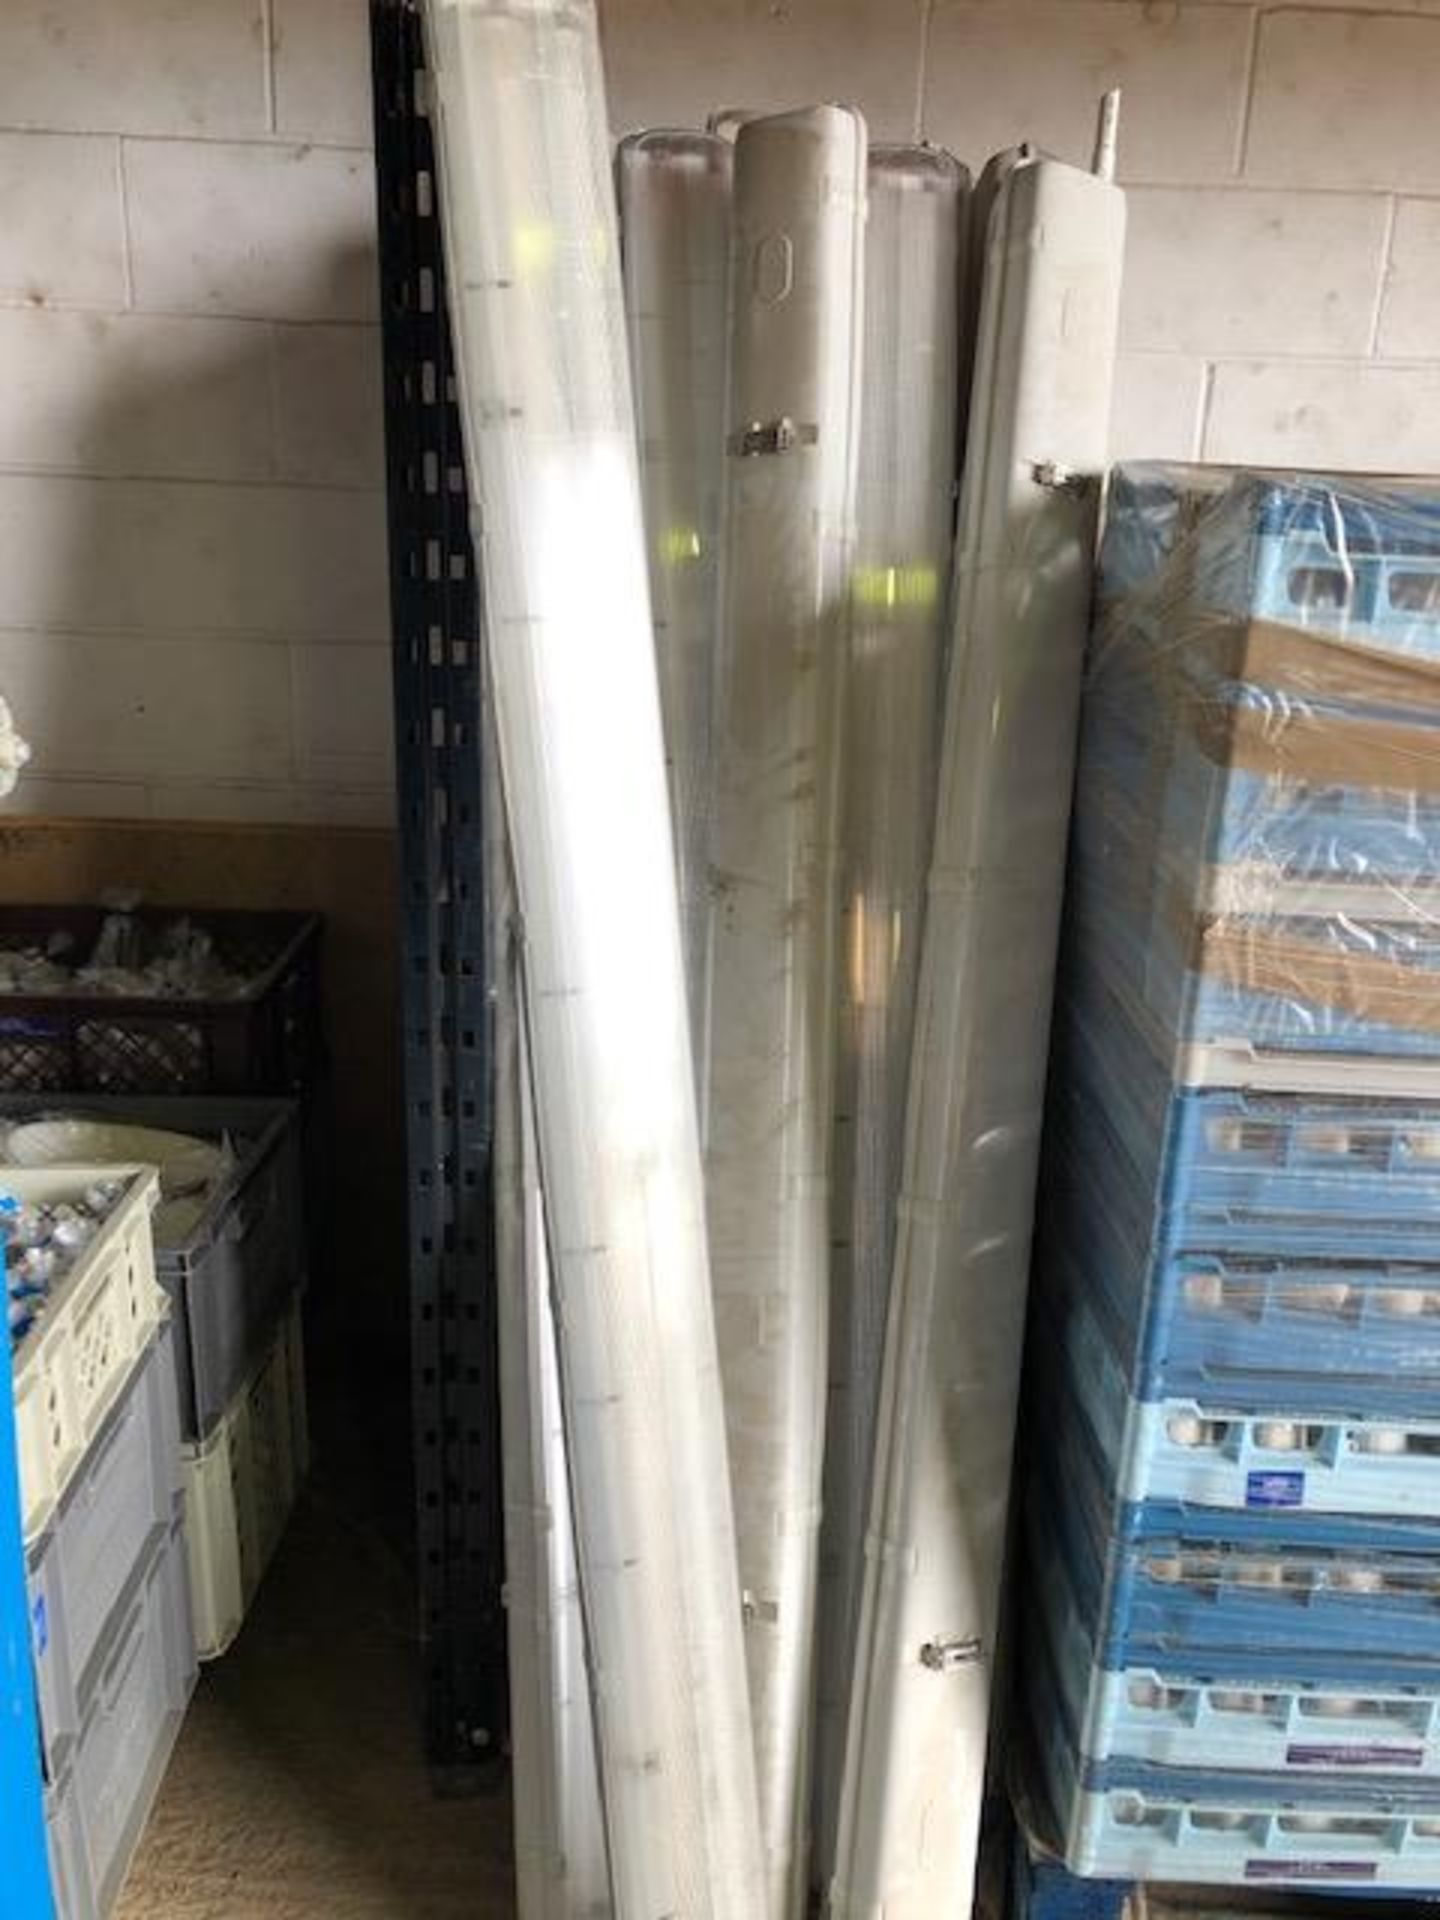 * 22x fluorescent light fittings and tubes